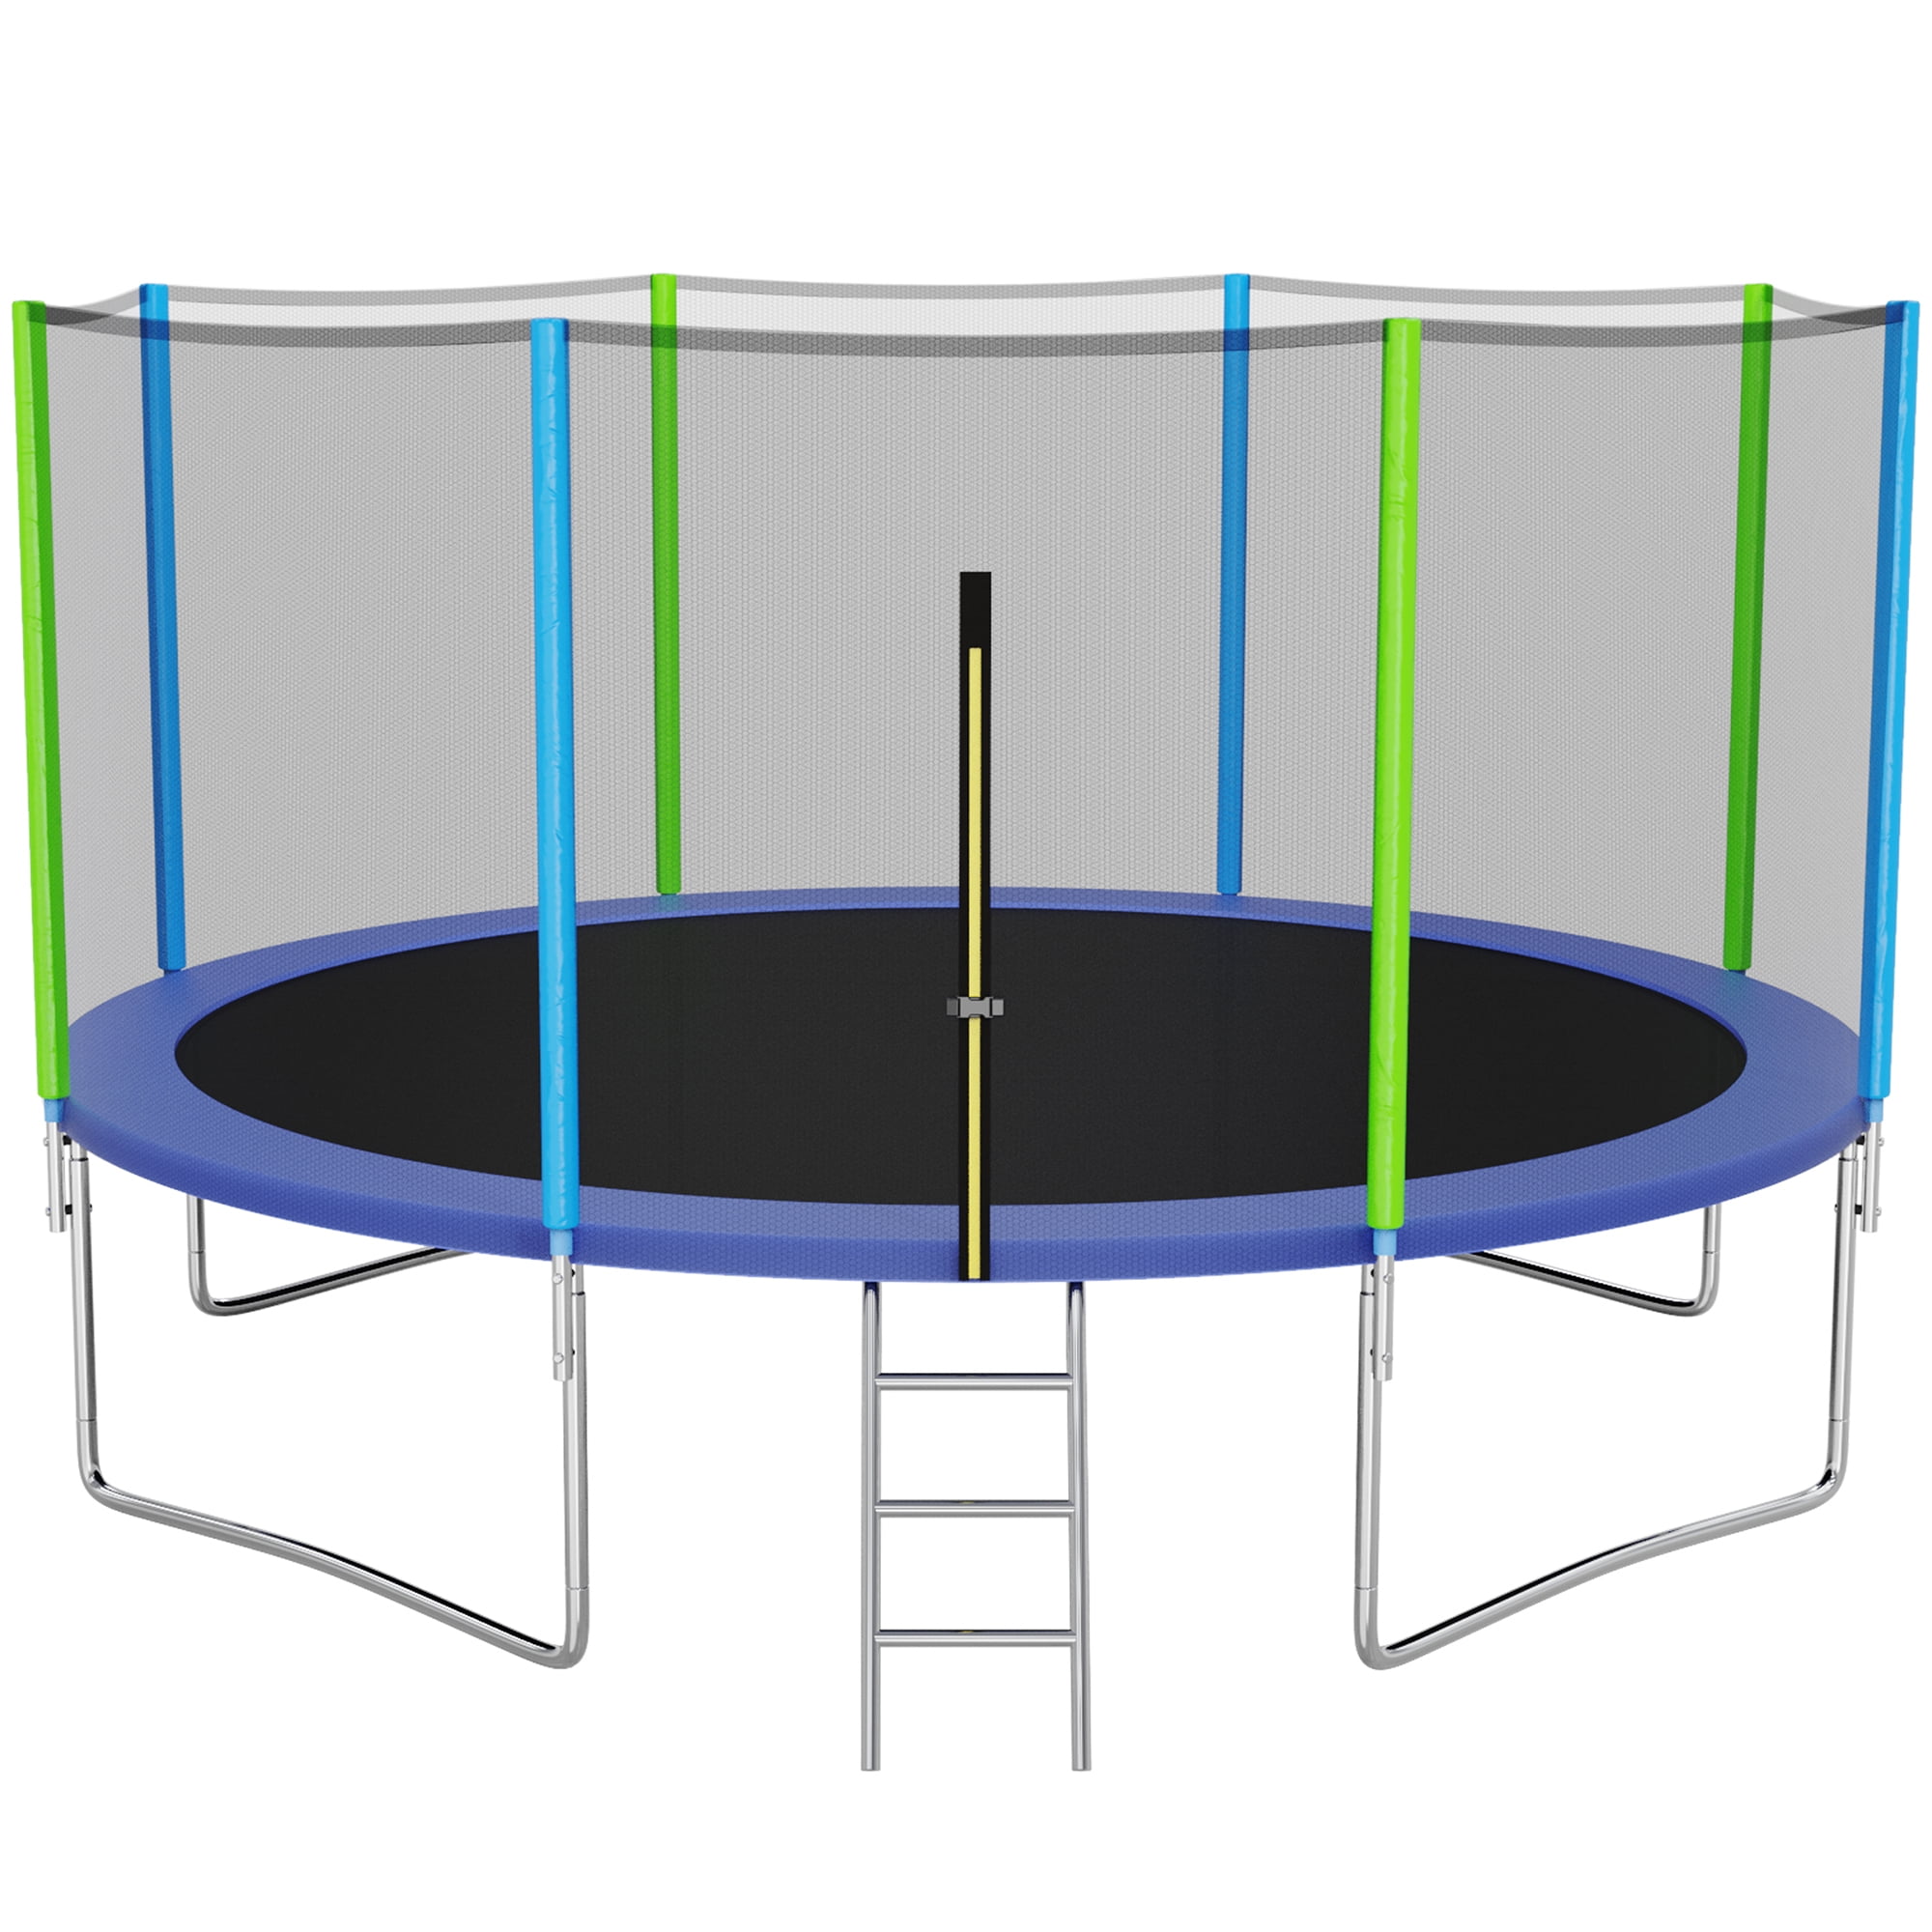 Humoristisch Slang accessoires YORIN 1000LBS 12FT 14FT Trampoline for Kids Adults, Outdoor Trampoline with  Safety Enclosure Net, Recreational Trampoline with Ladder, Heavy Duty No  Gap Design Trampoline Capacity for 5-6 Kids - Walmart.com